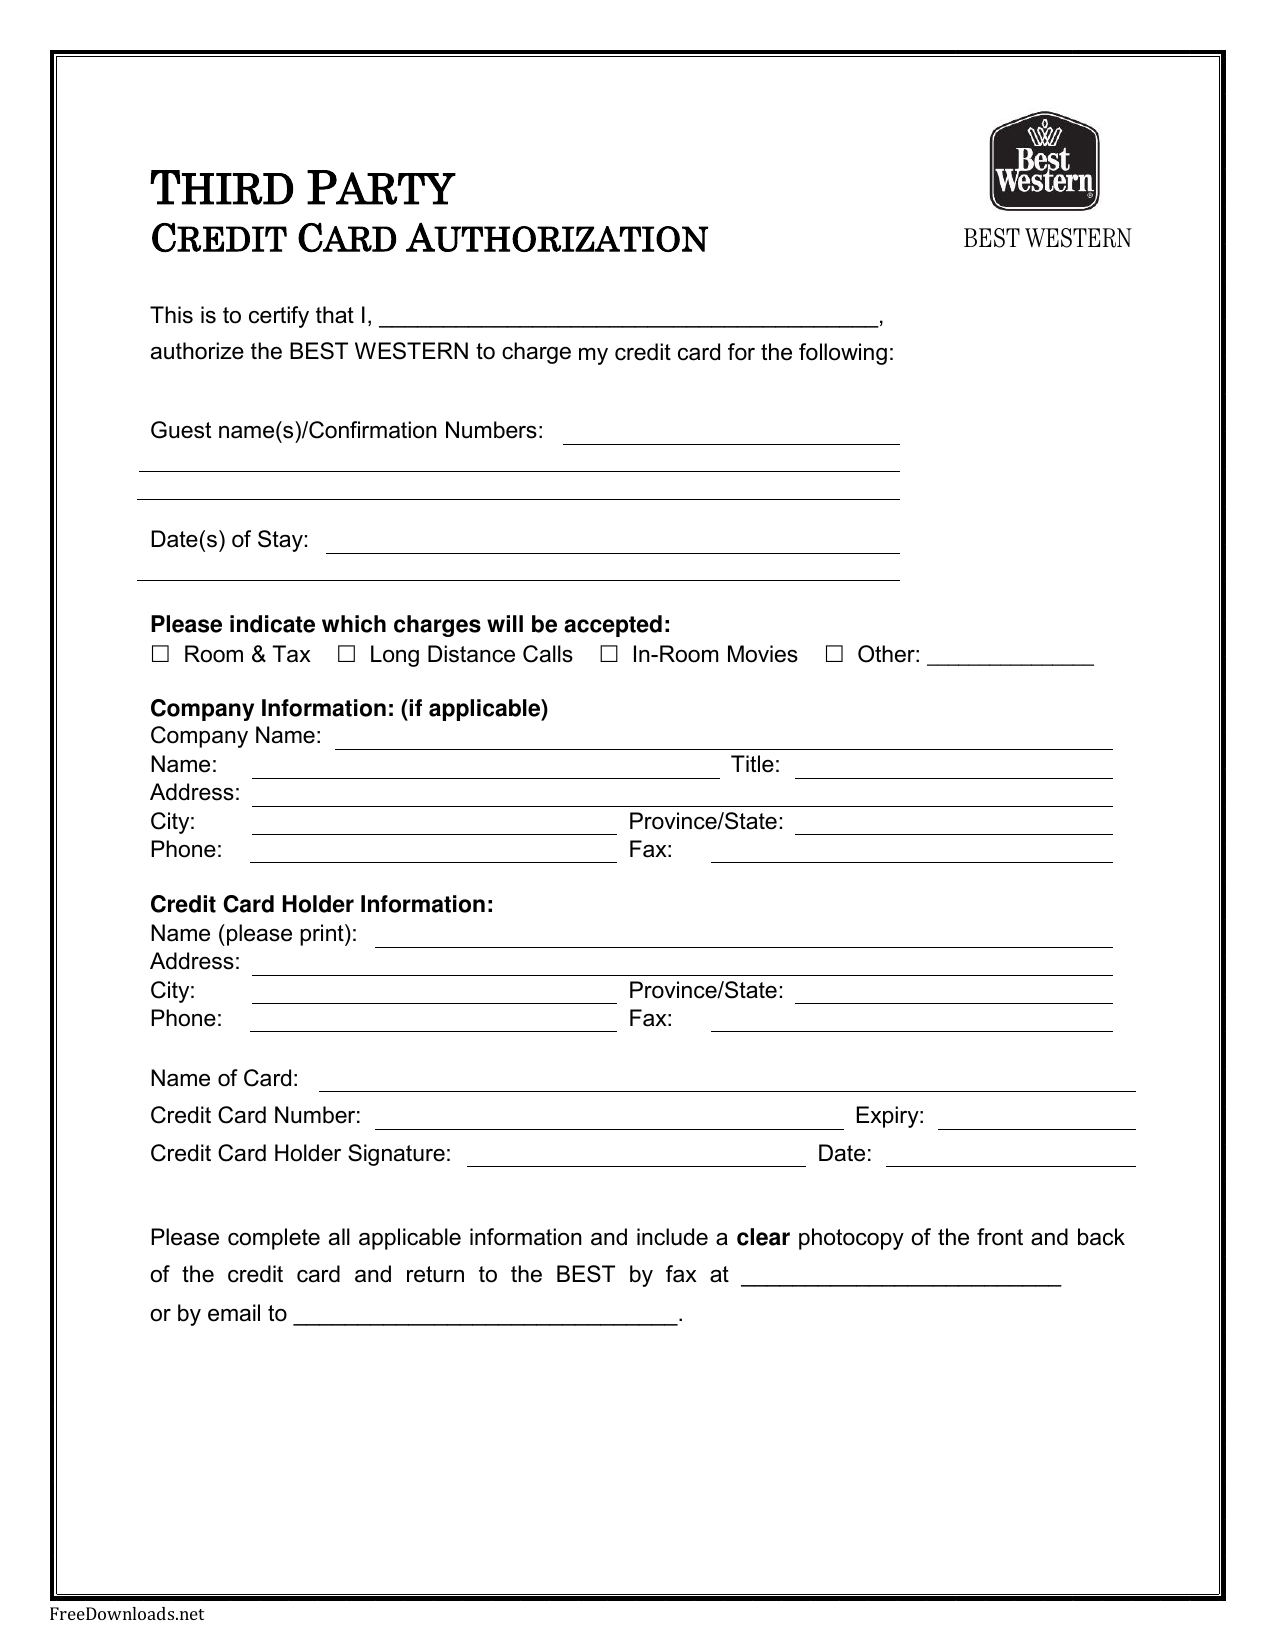 Download Best Western Credit Card Authorization Form Inside Order Form With Credit Card Template